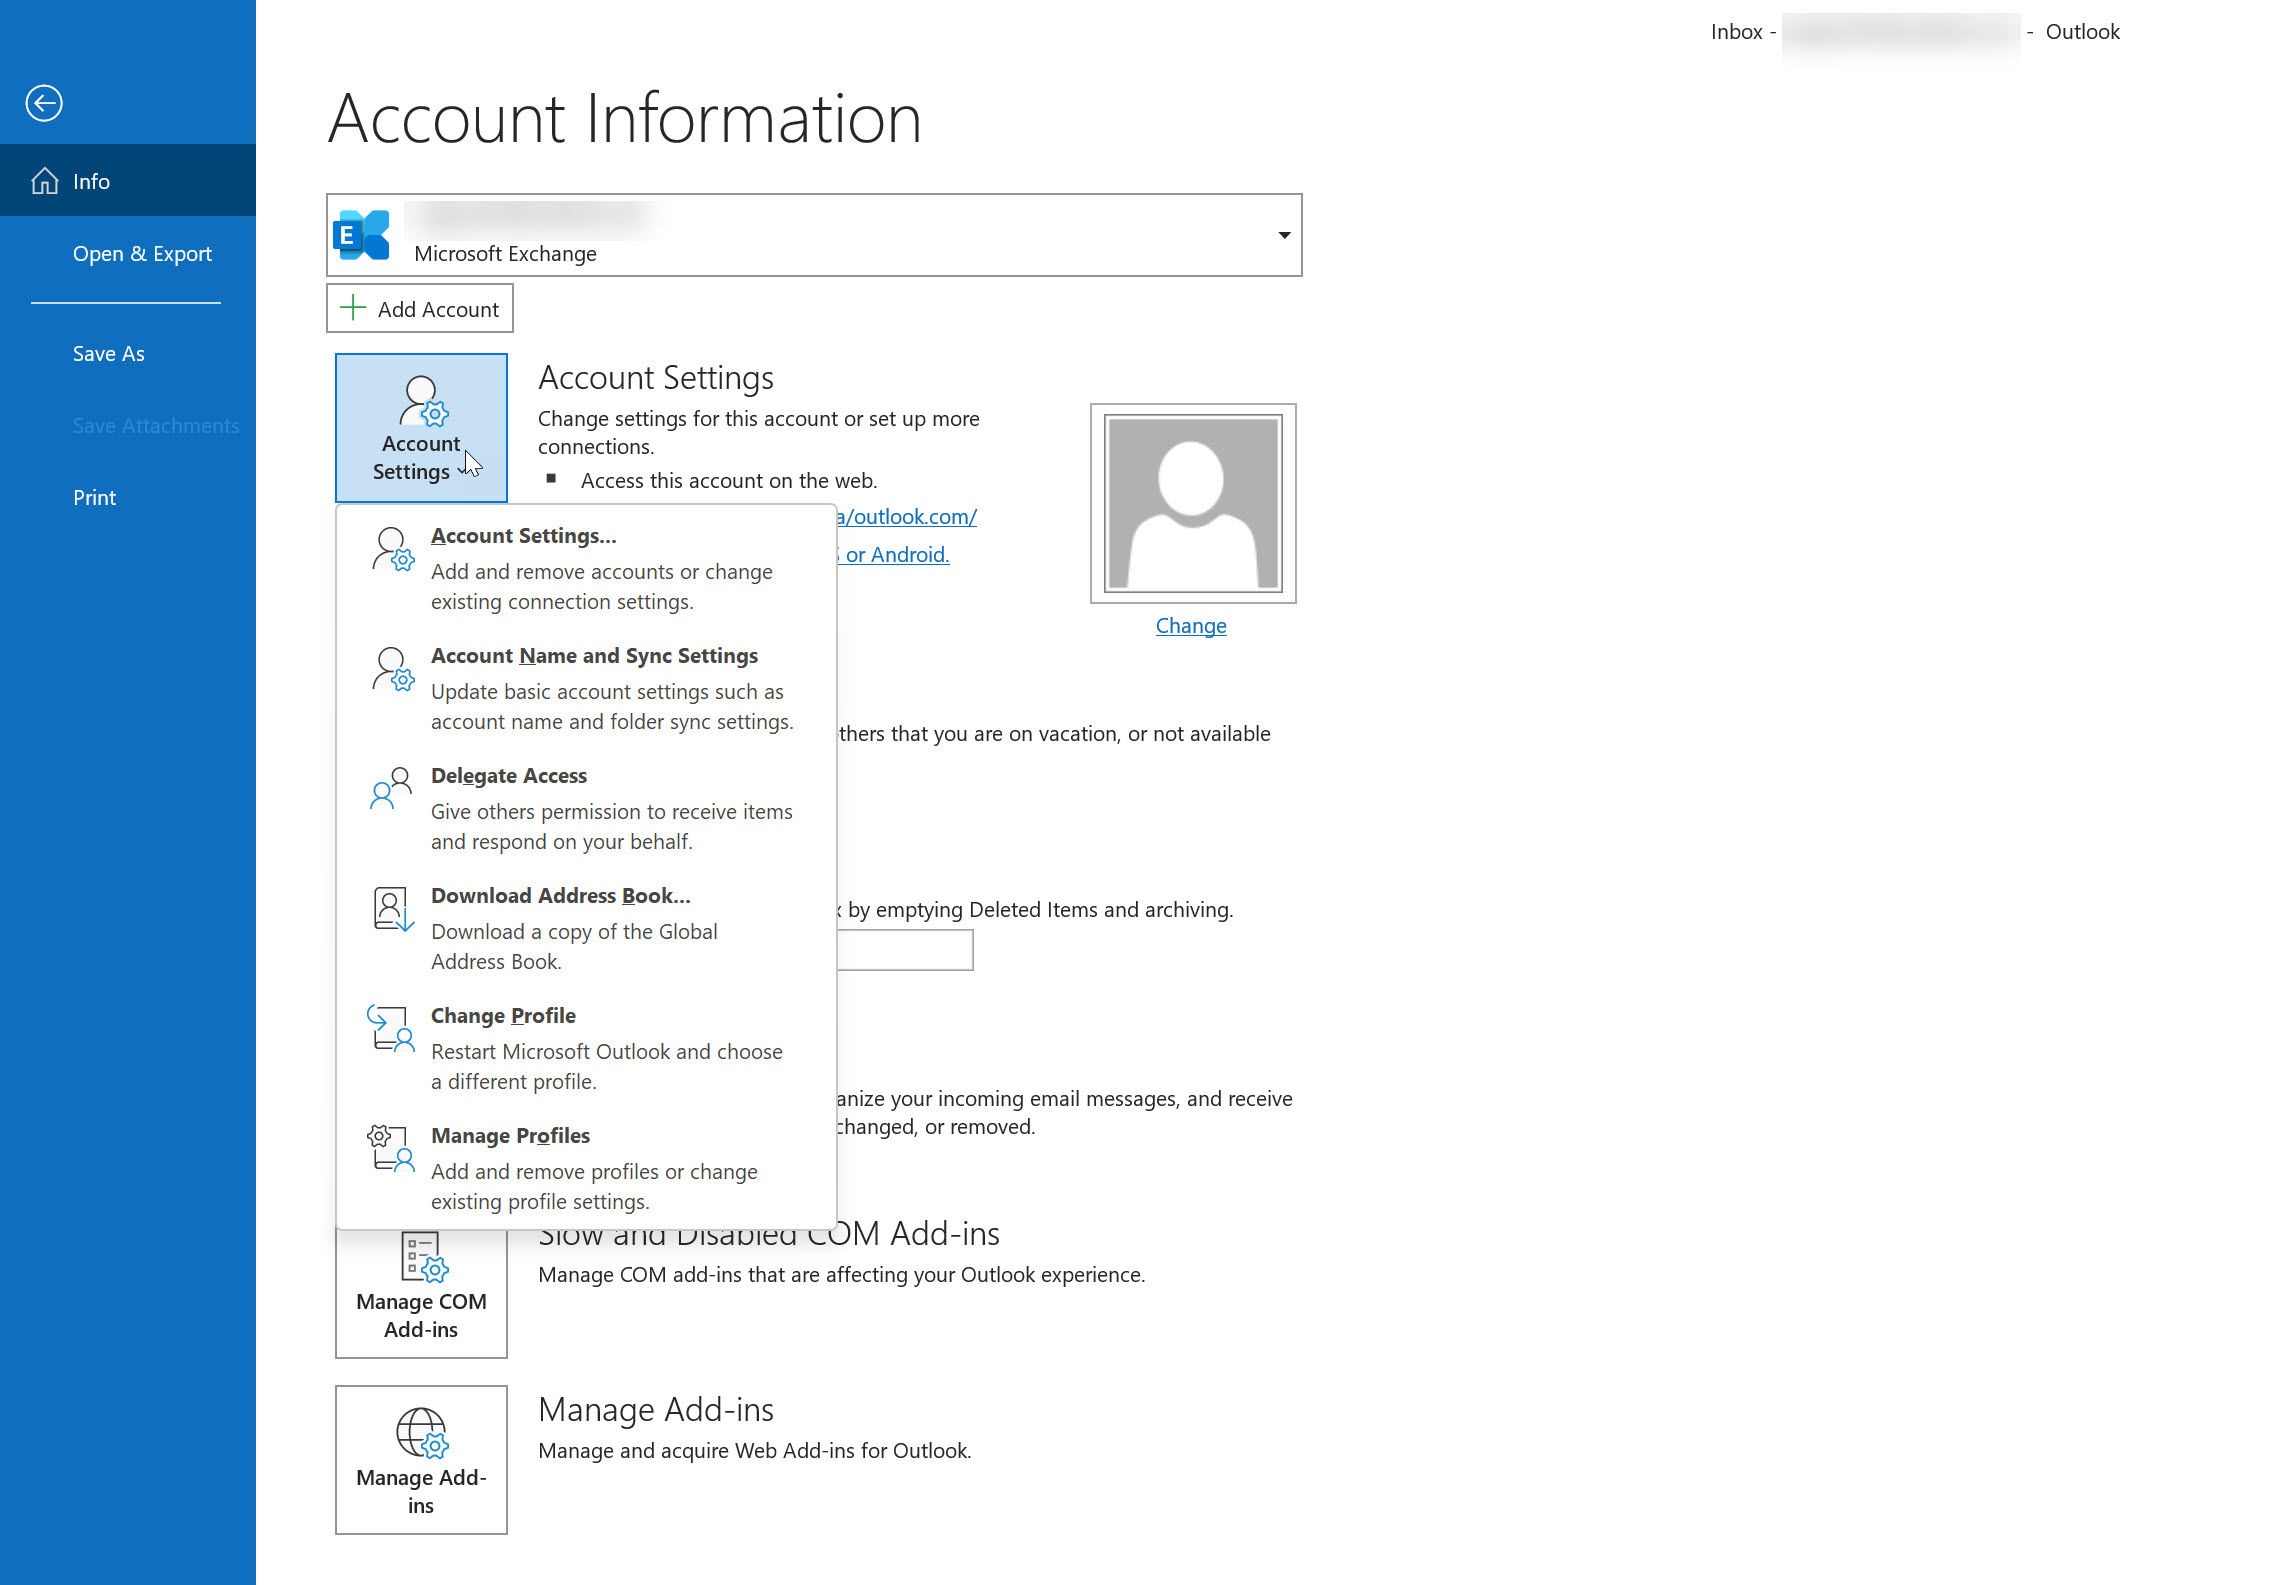  How to delete an Outlook account